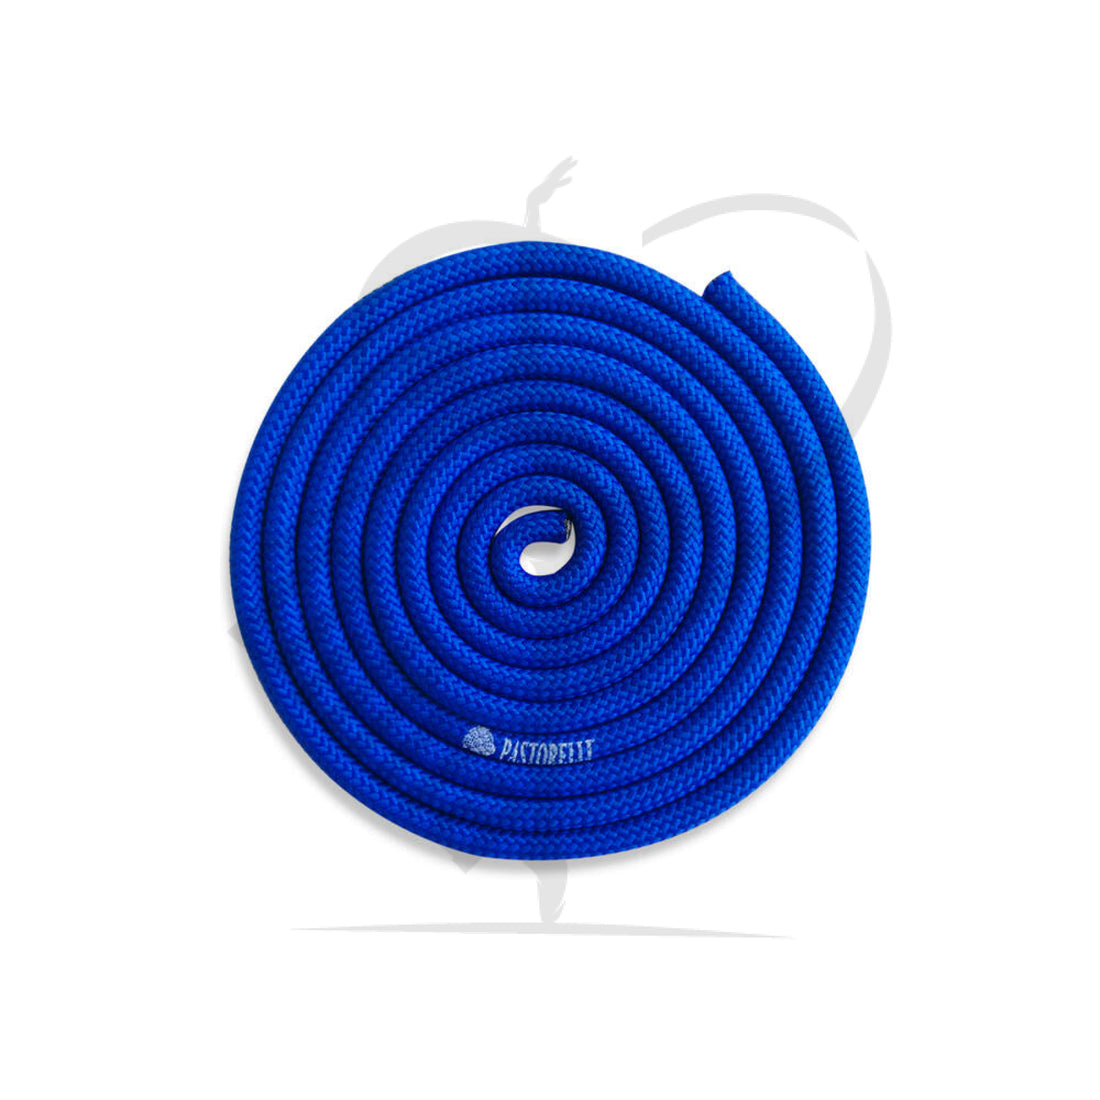 Pastorelli New Orleans Rope Xfluo Blue Ropes